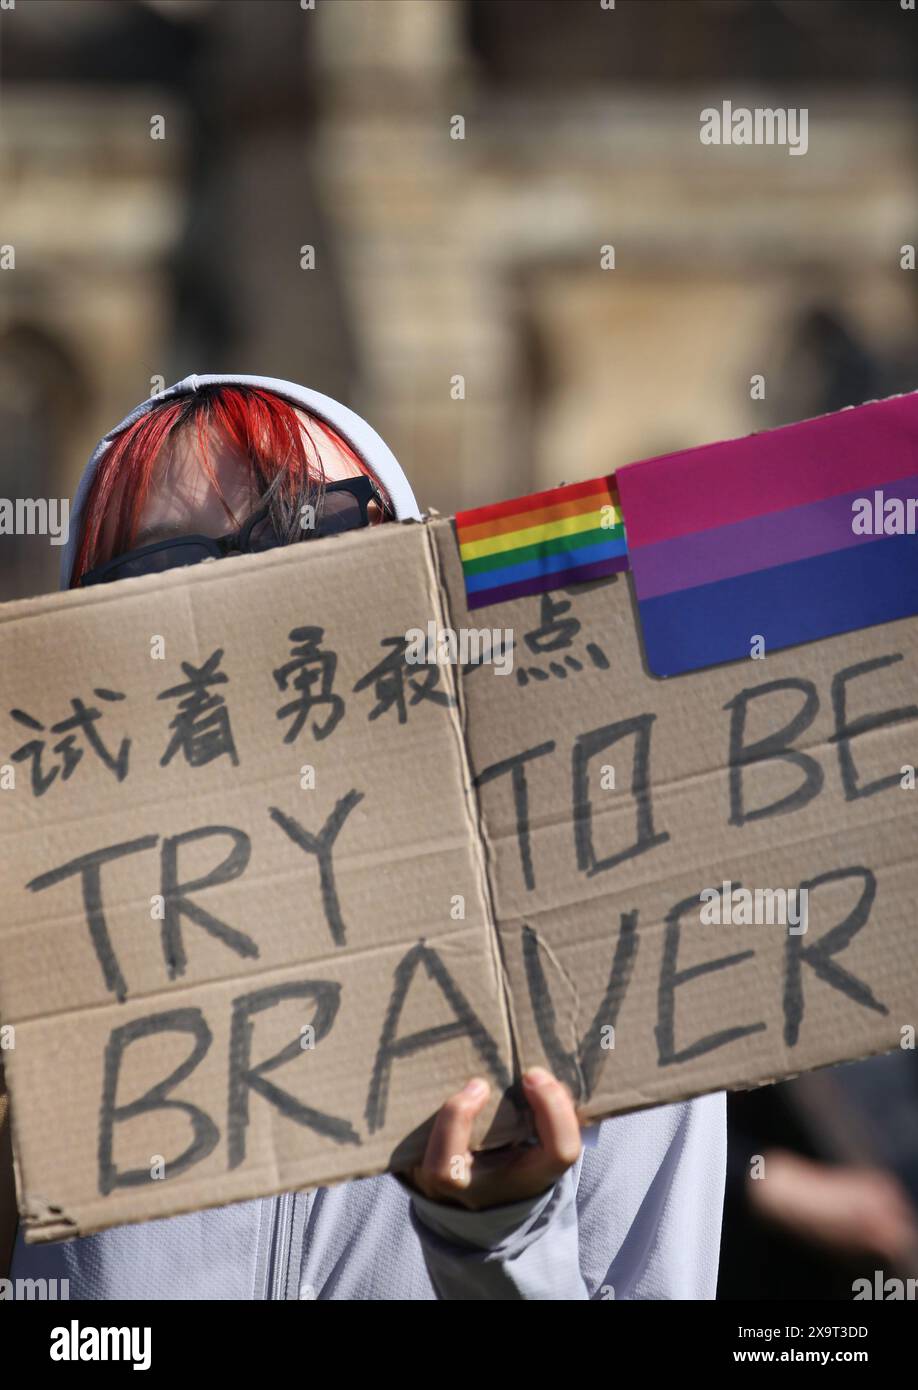 June 2, 2024, London, England, UK: A protester holds a sign saying ''˜Try To Be Braver' during the demonstration in Parliament Square. The event commemorated the1989 student-led protests and the Chinese government's bloody crackdown on 4 June, as well as protest against China's current clampdown on freedom of speech - including its increasing repression of Tibetans and Uyghurs, its crushing of dissent in Hong Kong, and the intimidation of Chinese and Hong Kong students in the UK, Europe and North America. Thirty-five years on, the Chinese authorities still ban information related to the Tian Stock Photo